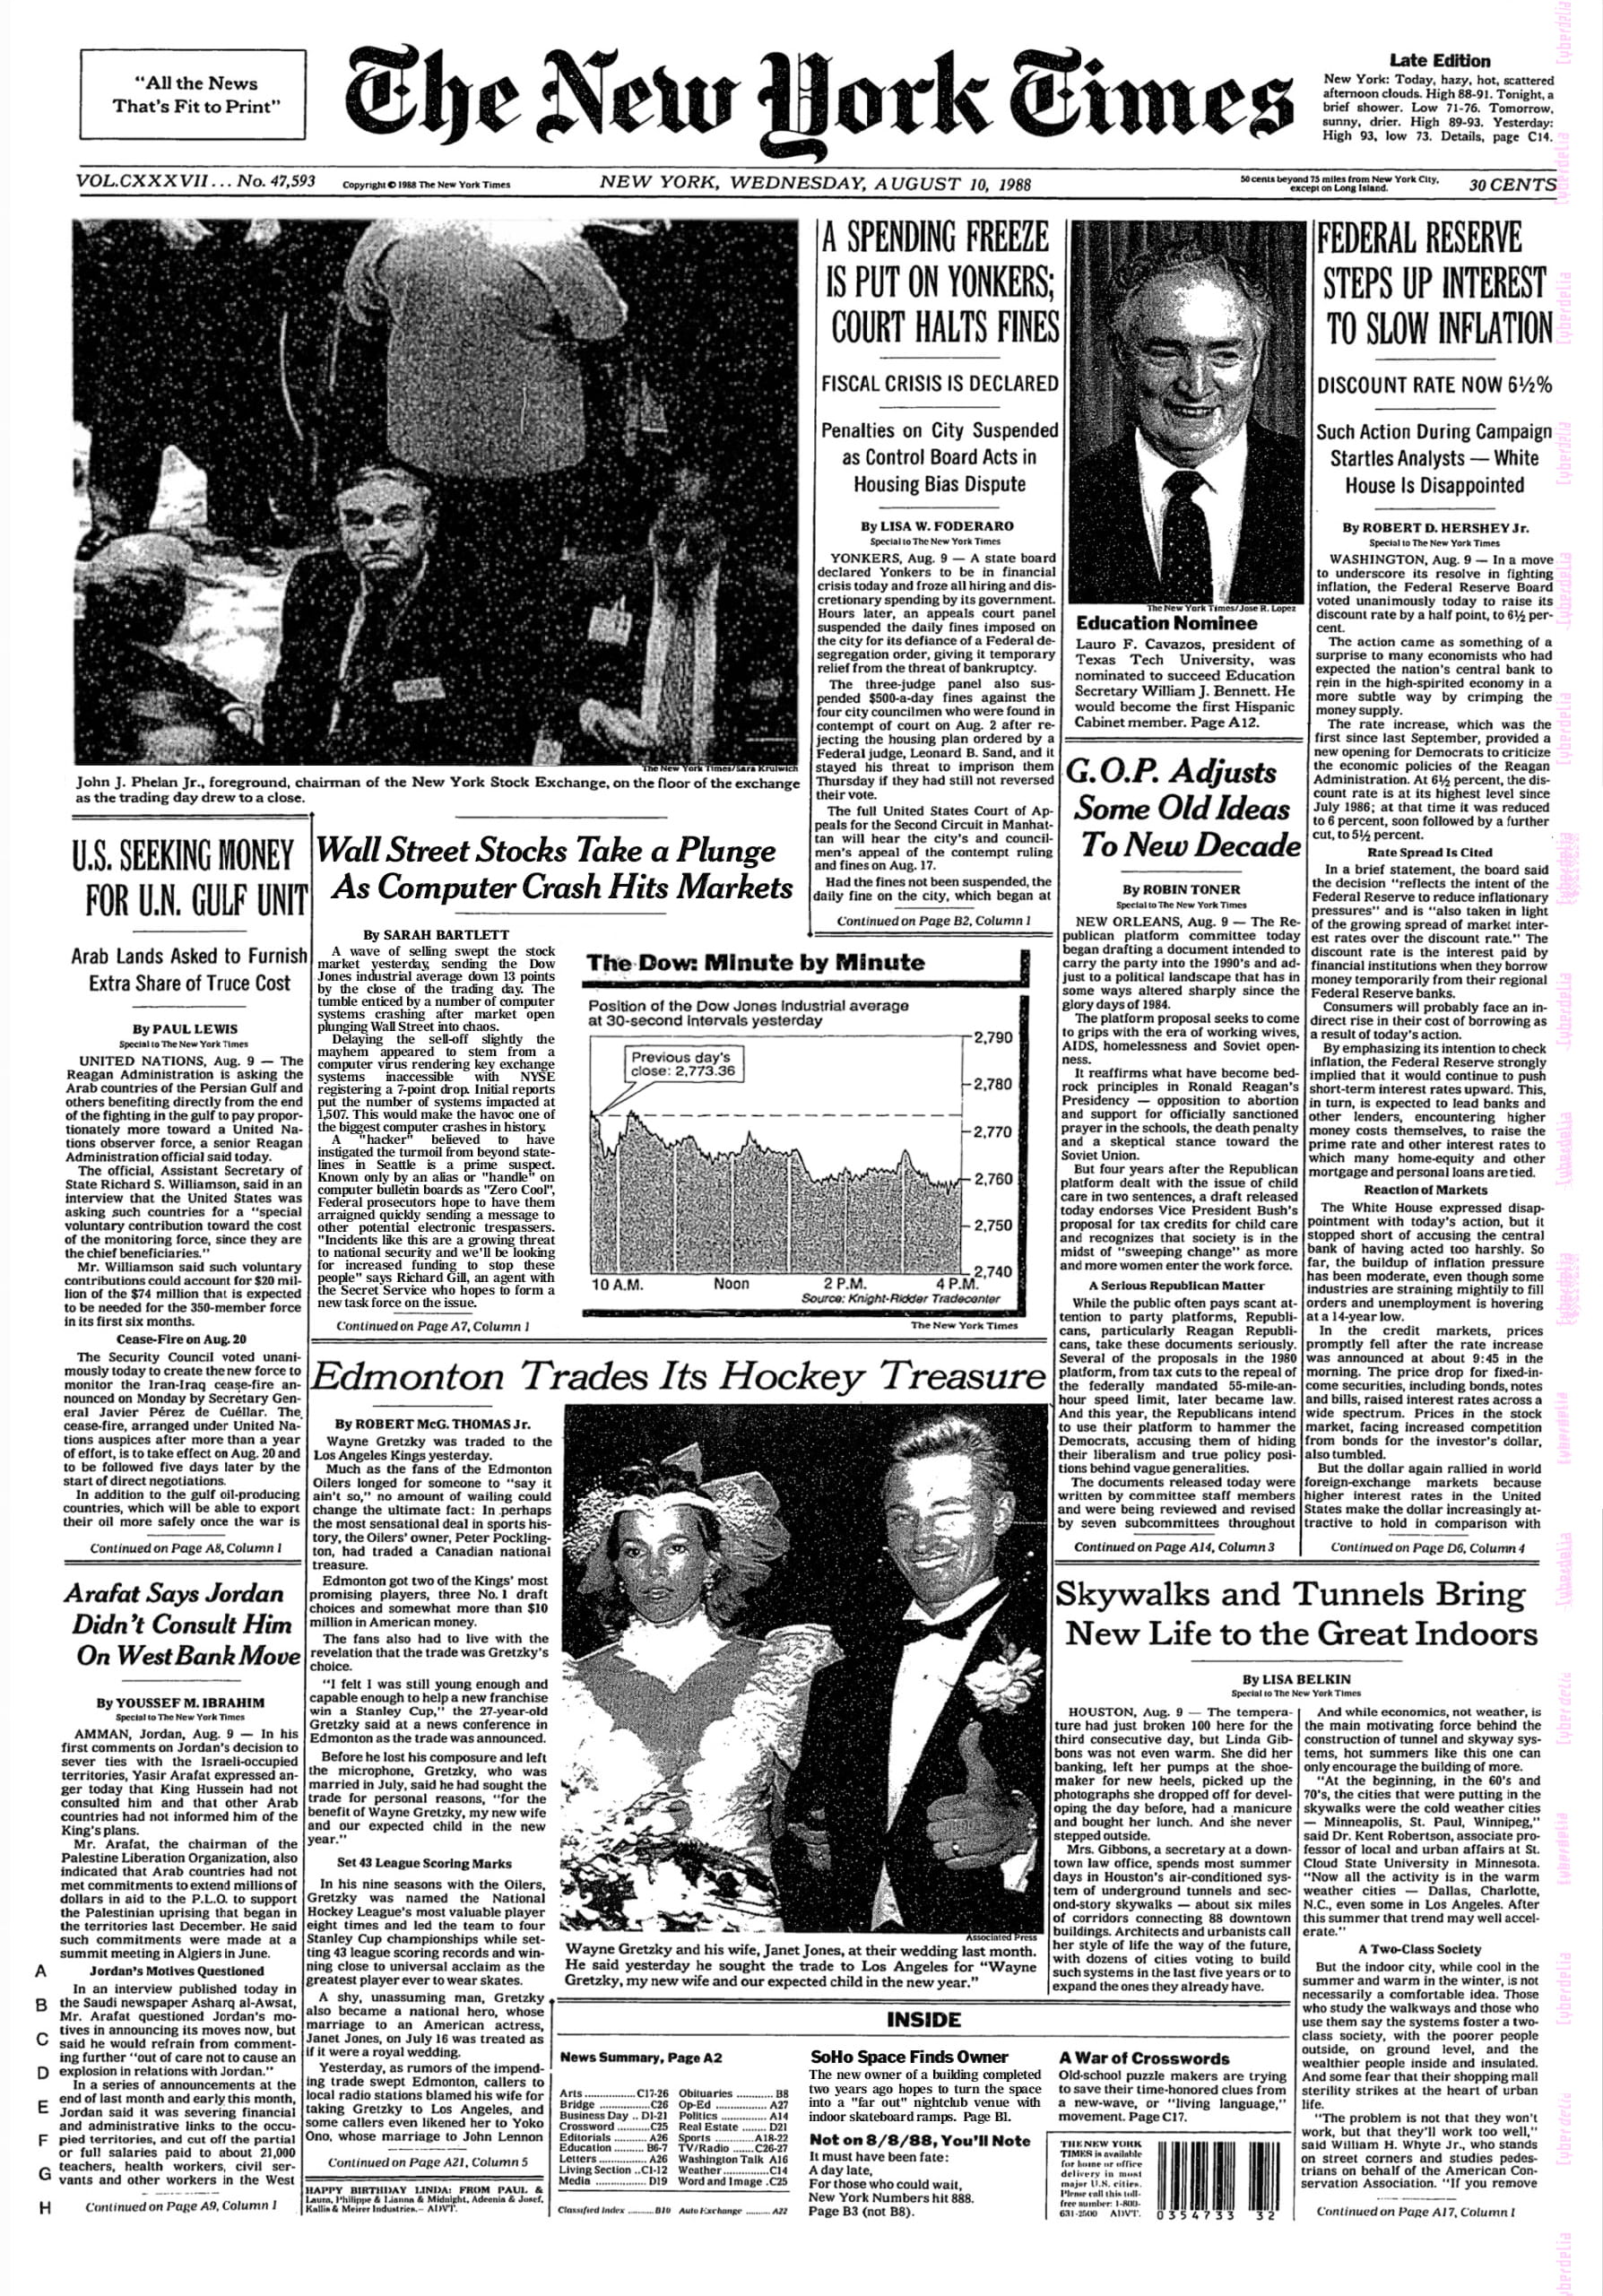 The New York Times. New York, Wednesday, August 10, 1988. Headline photo of man in suit staring upwards with caption 'John J. Phelan Jr., foreground, chairman of the New York Stock Exchange, on the floor of the exchange as the trading day drew to a close.'. Headline: 'Wall Street Stocks Take a Plunge As Computer Crash Hits Markets' A wave of selling swept the stock market yesterday, sending the Dow Jones industrial average down 13 points by the close of the trading day. The tumble enticed by a number of computer systems crashing after market open plunging Wall Street into chaos. 
Delaying the sell-off slightly the mayhem appeared to stem from a computer virus rendering key exchange systems inaccessible with NYSE registering a 7-point drop. Initial reports put the number of systems impacted at 1,507. This would make the havoc one of the biggest computer crashes in history.
A 'hacker' believed to have instigated the turmoil from beyond state-lines in Seattle is a prime suspect. Known only by an alias or 'handle' on computer bulletin boards as 'Zero Cool', Federal prosecutors hope to have them arraigned quickly sending a message to other potential electronic trespassers. 'Incidents like this are a growing threat to national security and we'll be looking for increased funding to stop these people' says Richard Gill, an agent with the Secret Service who hopes to form a new task force on the issue..Continued on Page A7 Column 1.... Other headlines and stories include 'Edmonton Trades Its Hockey Treasure', 'Skywalks and Tunnels Bring New Life to the Great Indoors', 'US Seeking Money for UN Gulf Unit','A Spending Freeze Is Put on Yonkers; Court Halts Fines','Federal Reserve Steps Up Interest to Slow Inflation', 'SoHo Space Finds Owner'